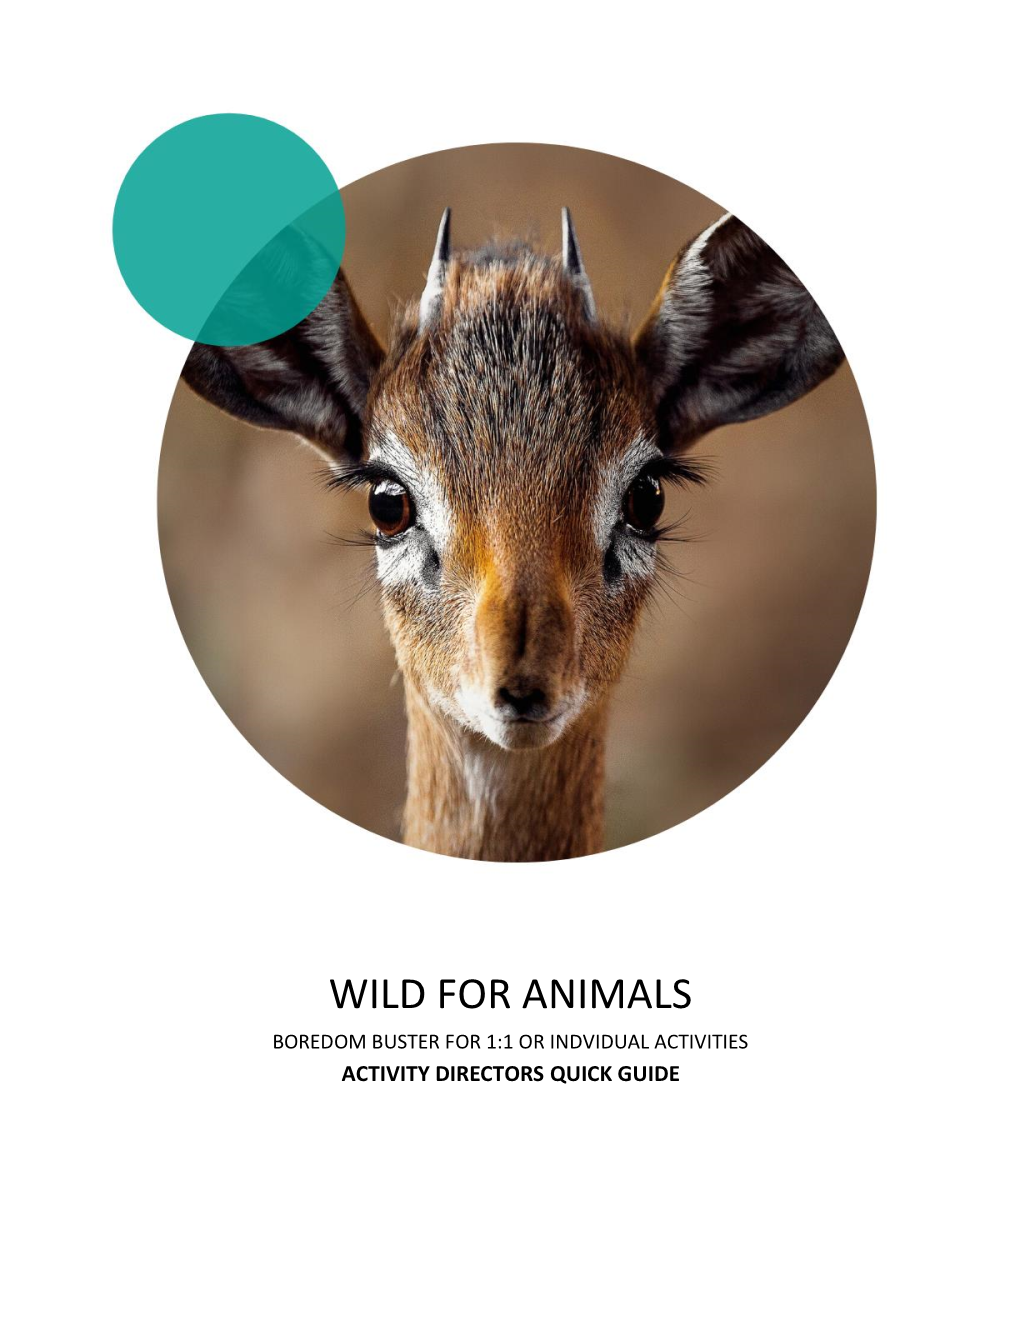 Wild for Animals Boredom Buster for 1:1 Or Indvidual Activities Activity Directors Quick Guide